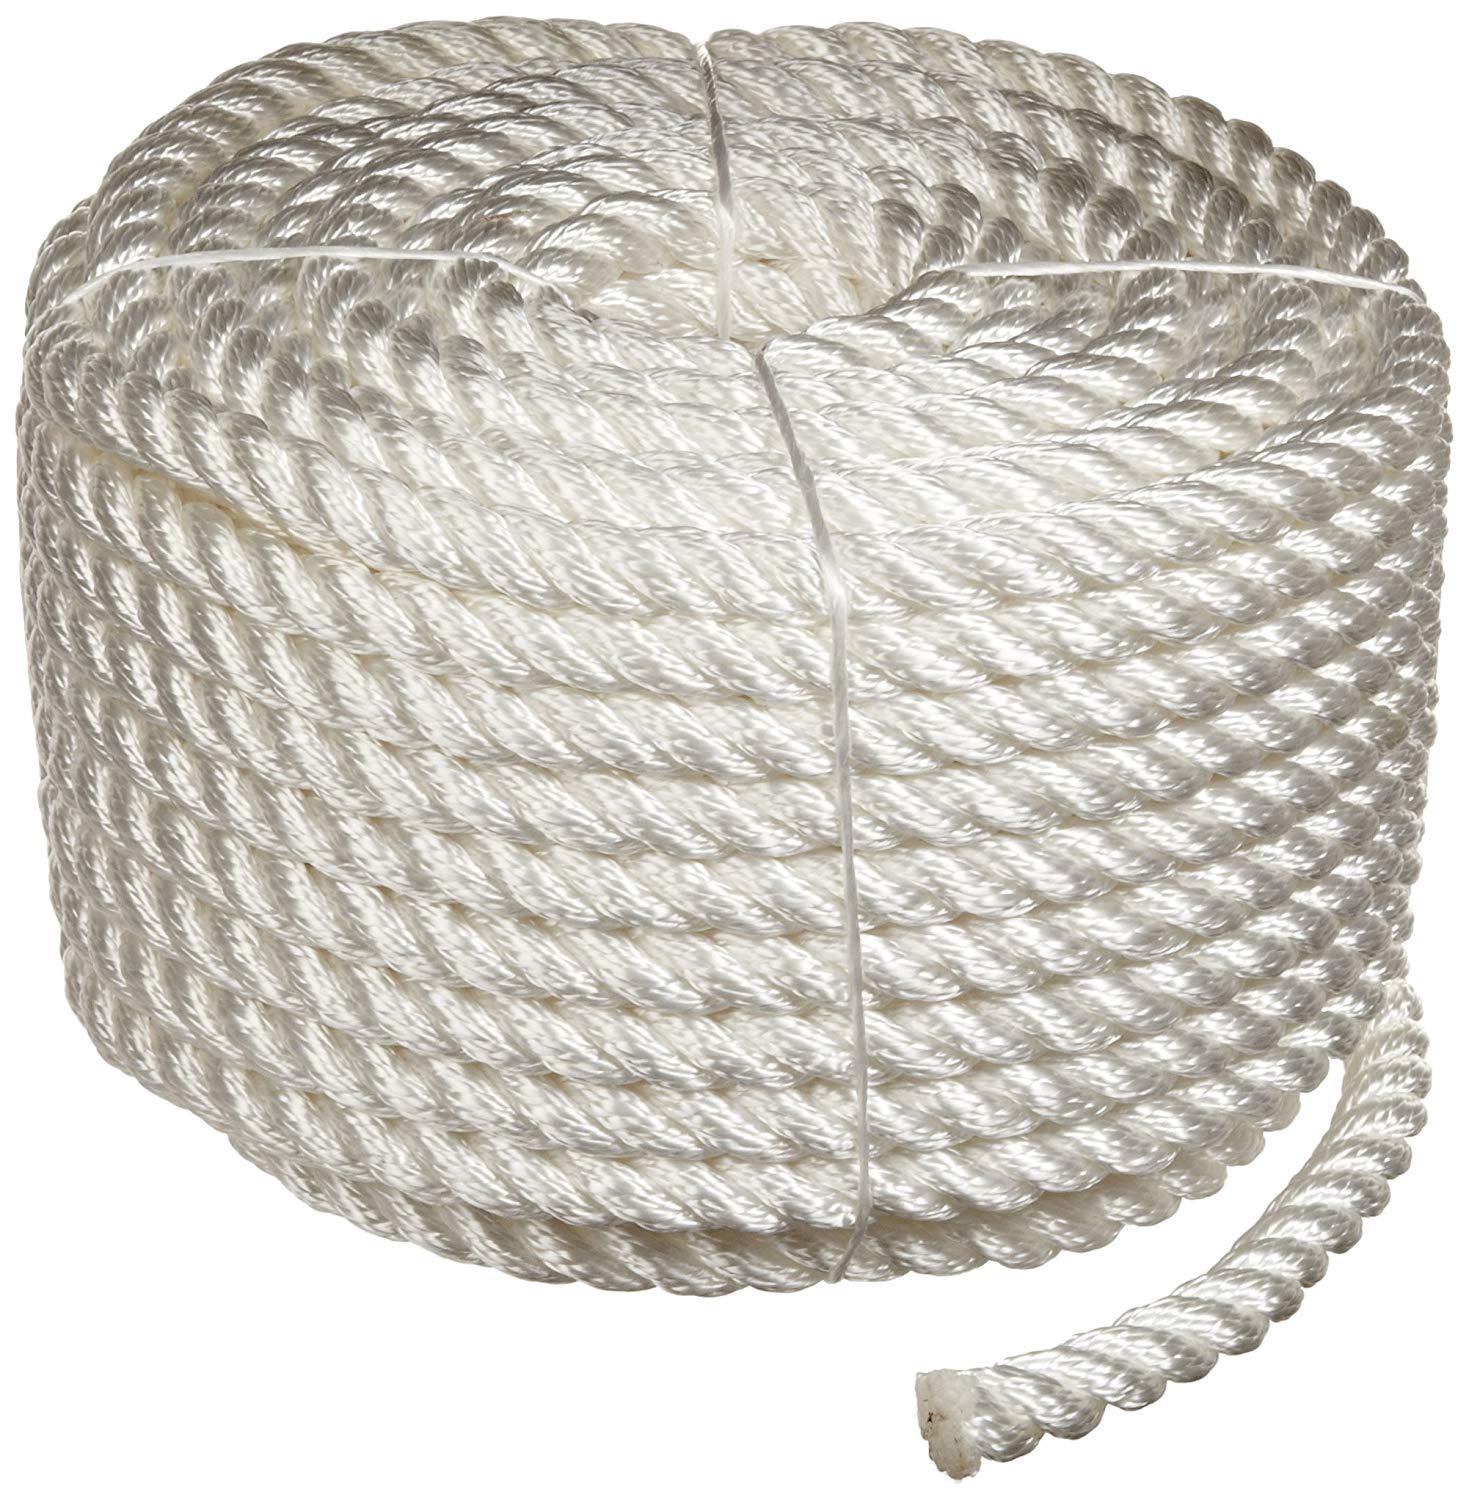 Rope King TN-12100 Twisted Nylon Rope Coil 1/2 inch x 100 feet ...